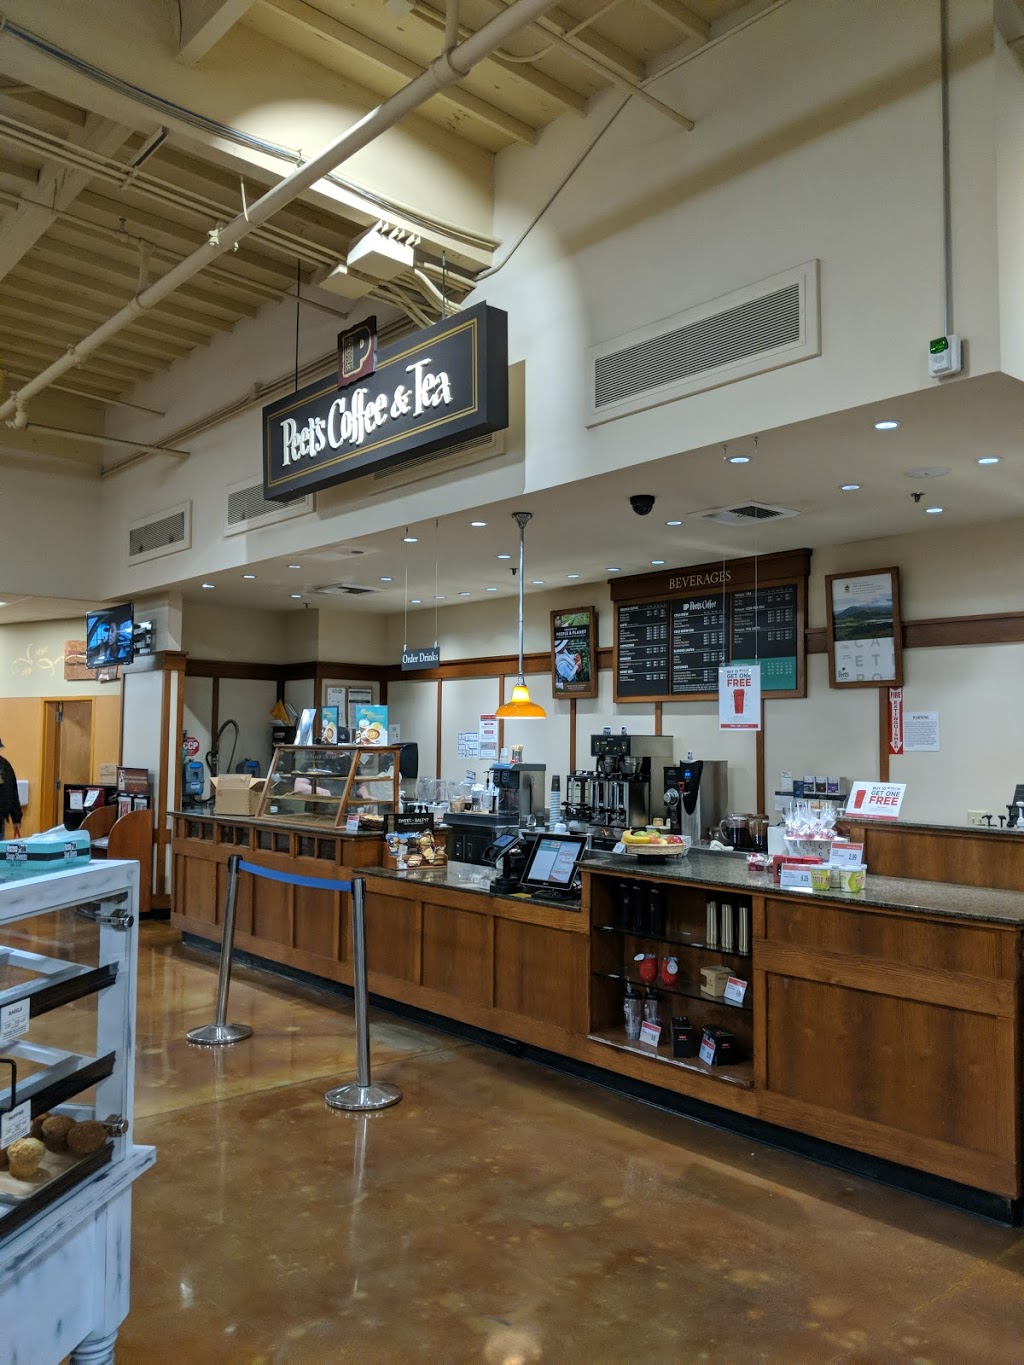 Peets Coffee | Nob Hill Foods, 1250 Grant Rd, Mountain View, CA 94040 | Phone: (650) 390-9205